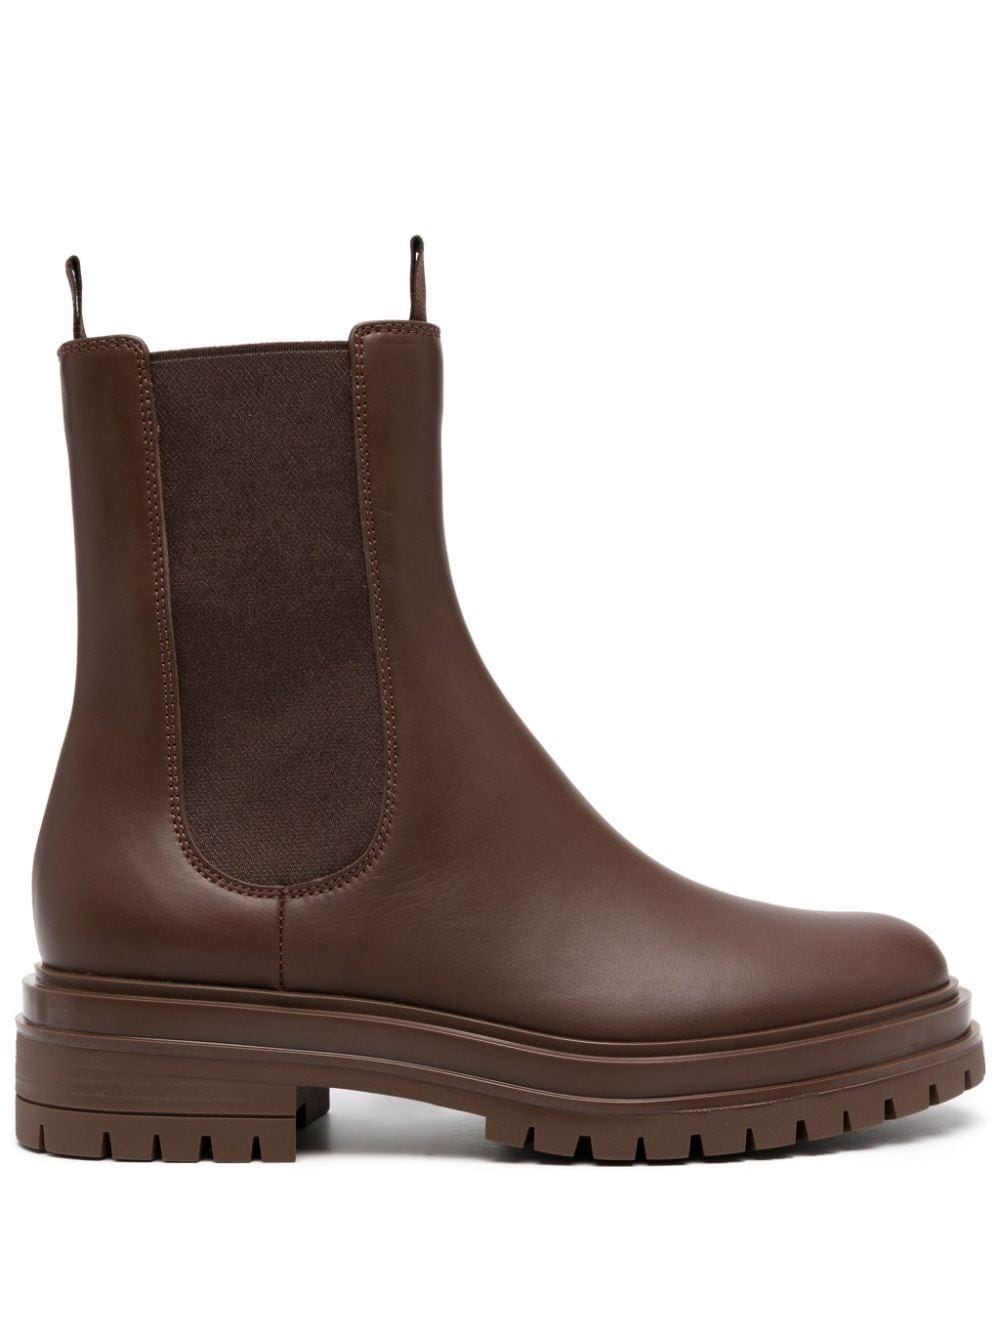 GIANVITO ROSSI BROWN LEATHER CHELSEA BOOTS